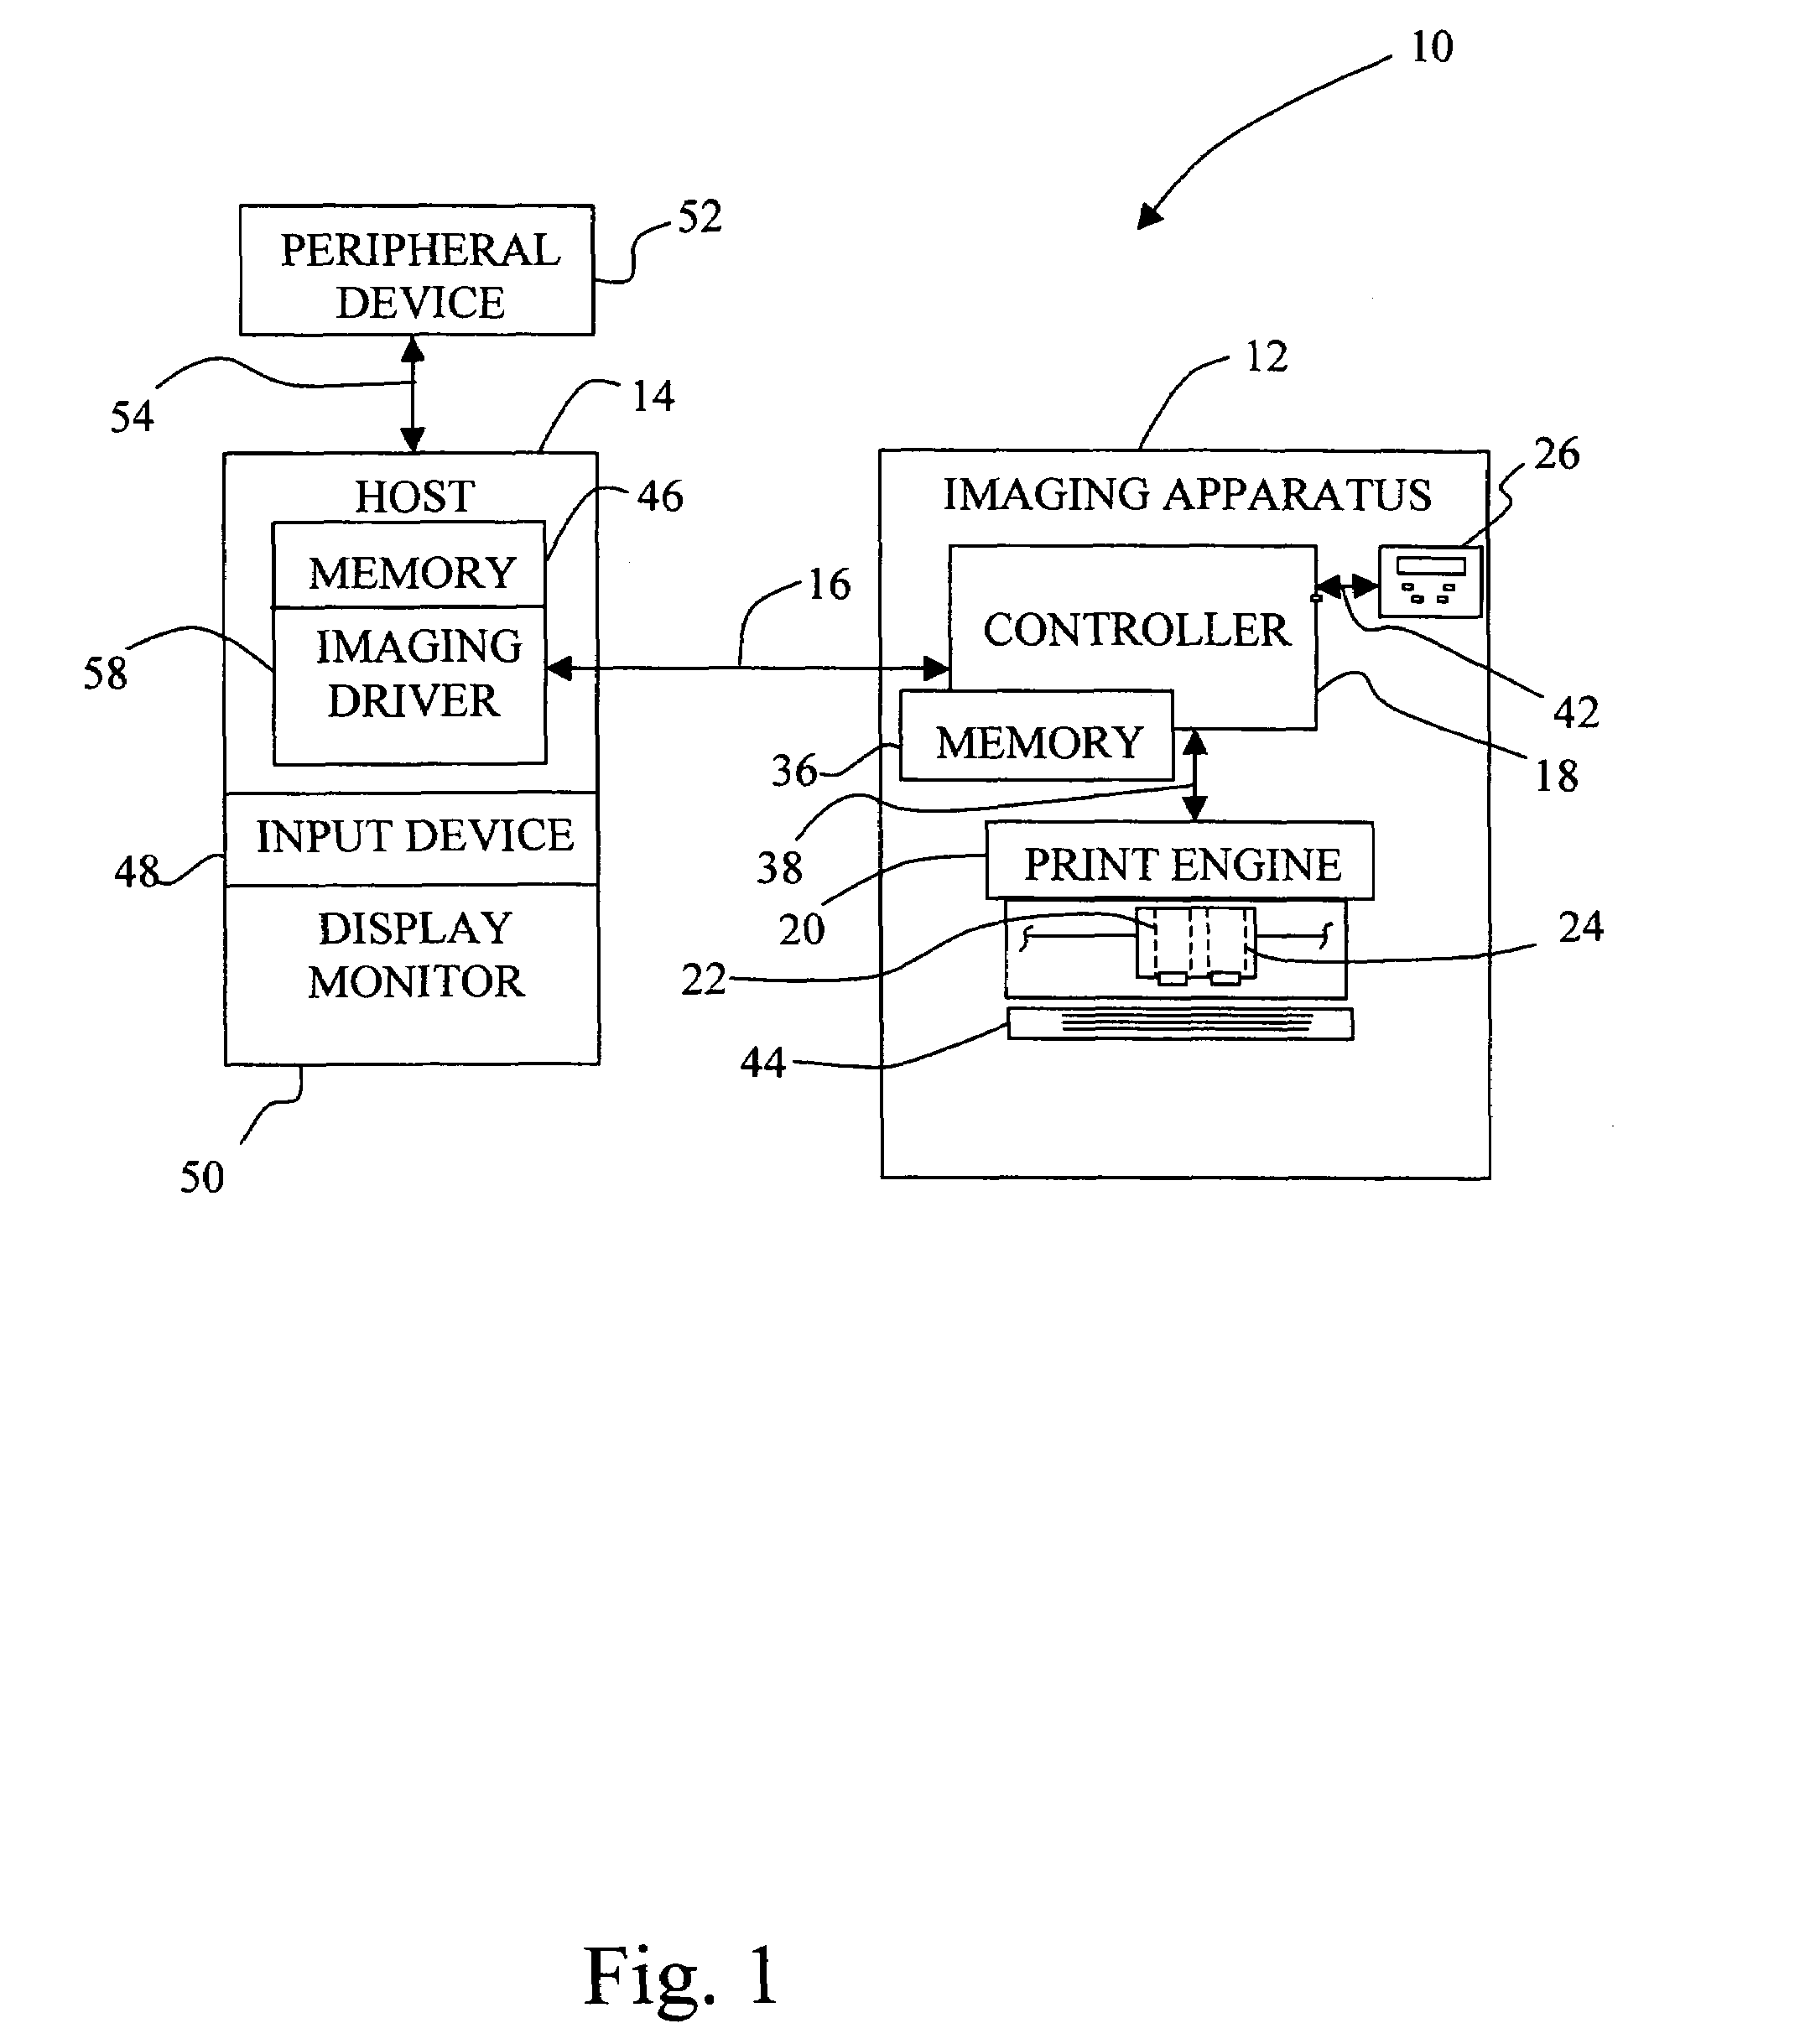 Method of selecting inks for use in imaging with an imaging apparatus